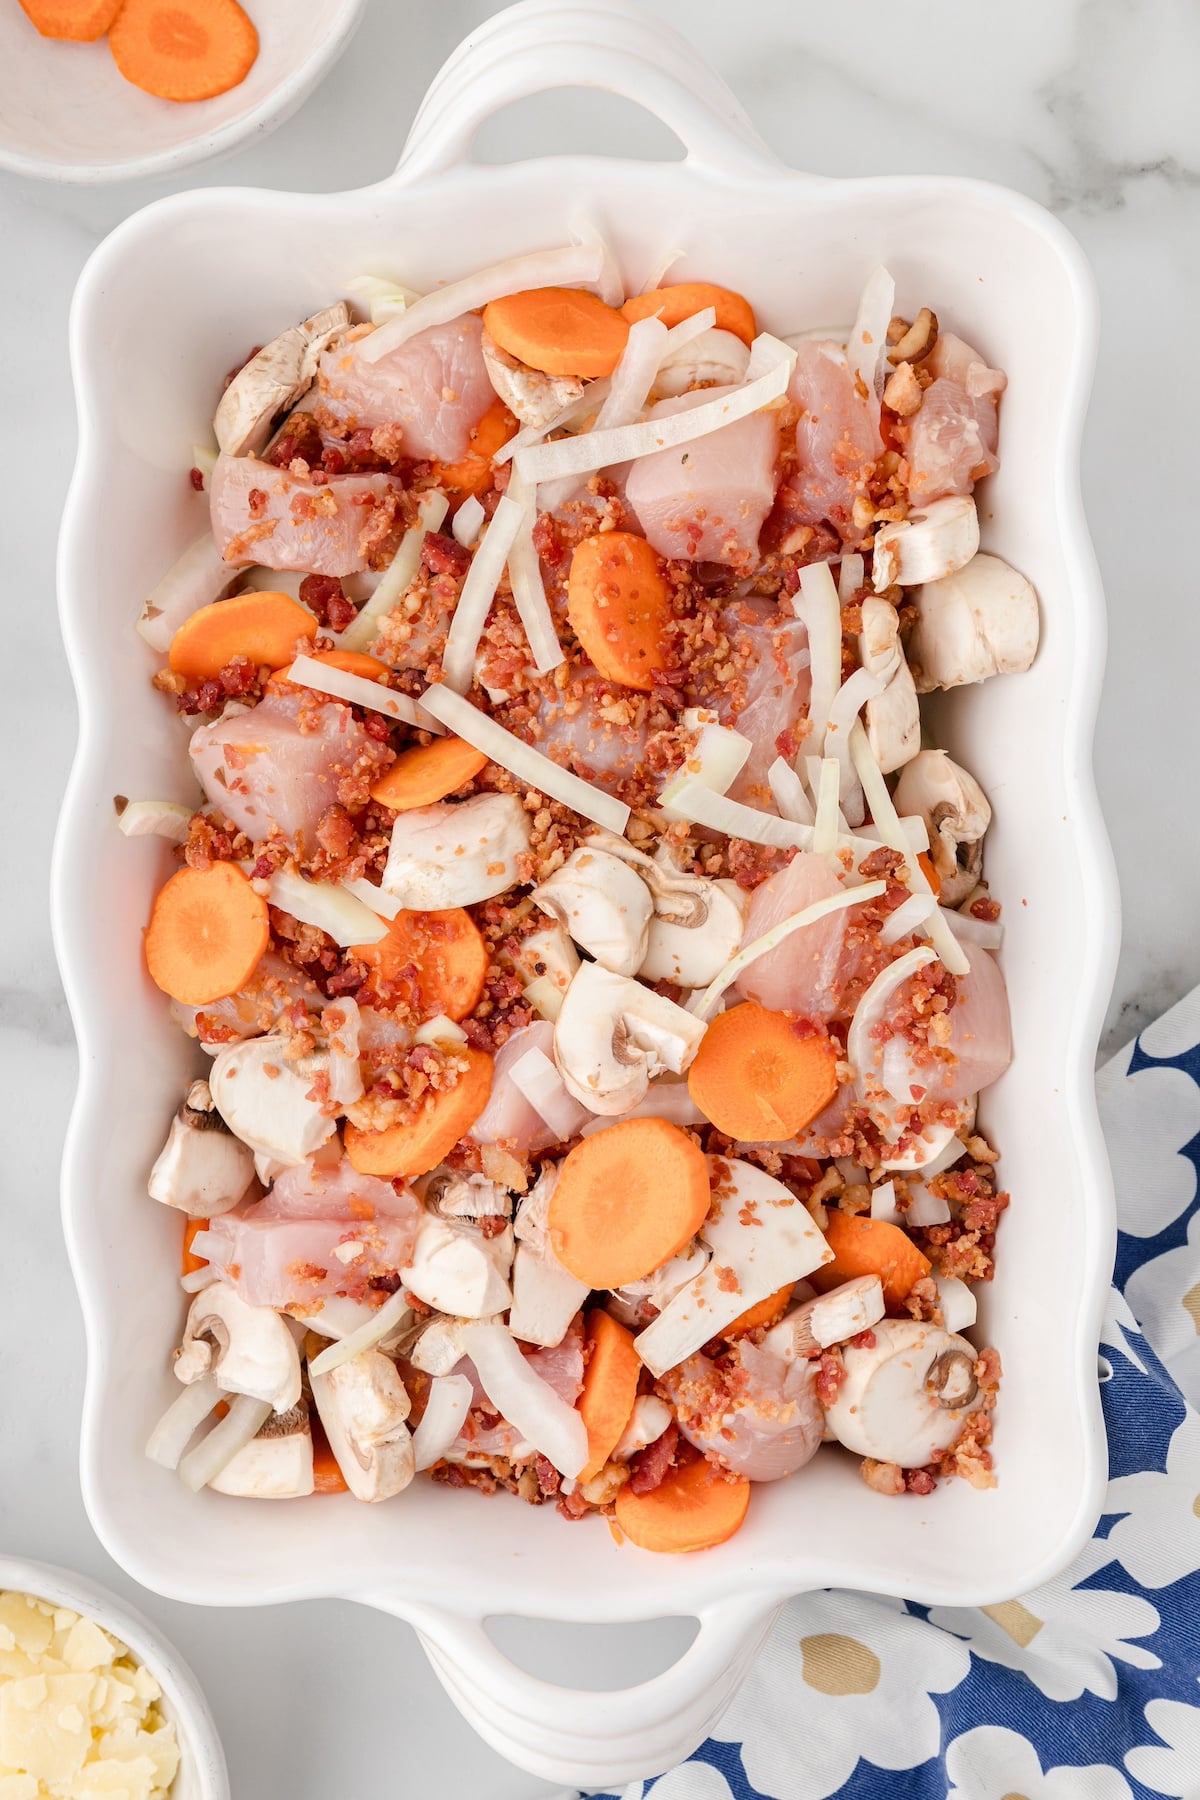 add the chicken, carrots, mushrooms, and onions to a baking dish